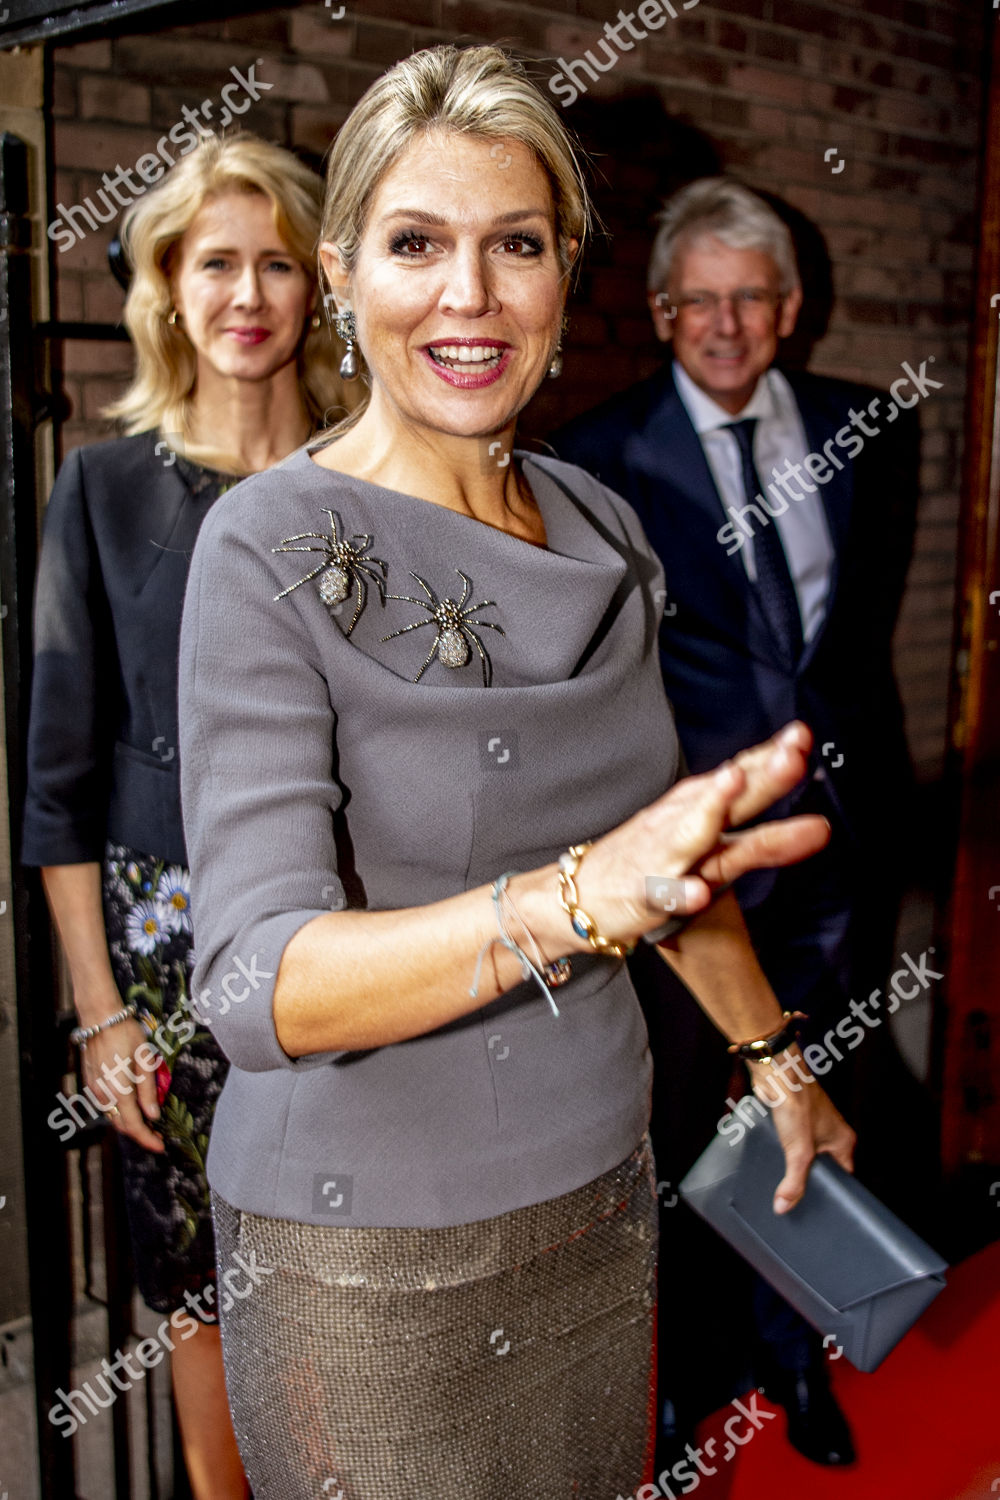 queen-maxima-arrives-at-the-annual-congress-of-mkb-netherlands-the-hague-the-netherlands-shutterstock-editorial-9919554h.jpg